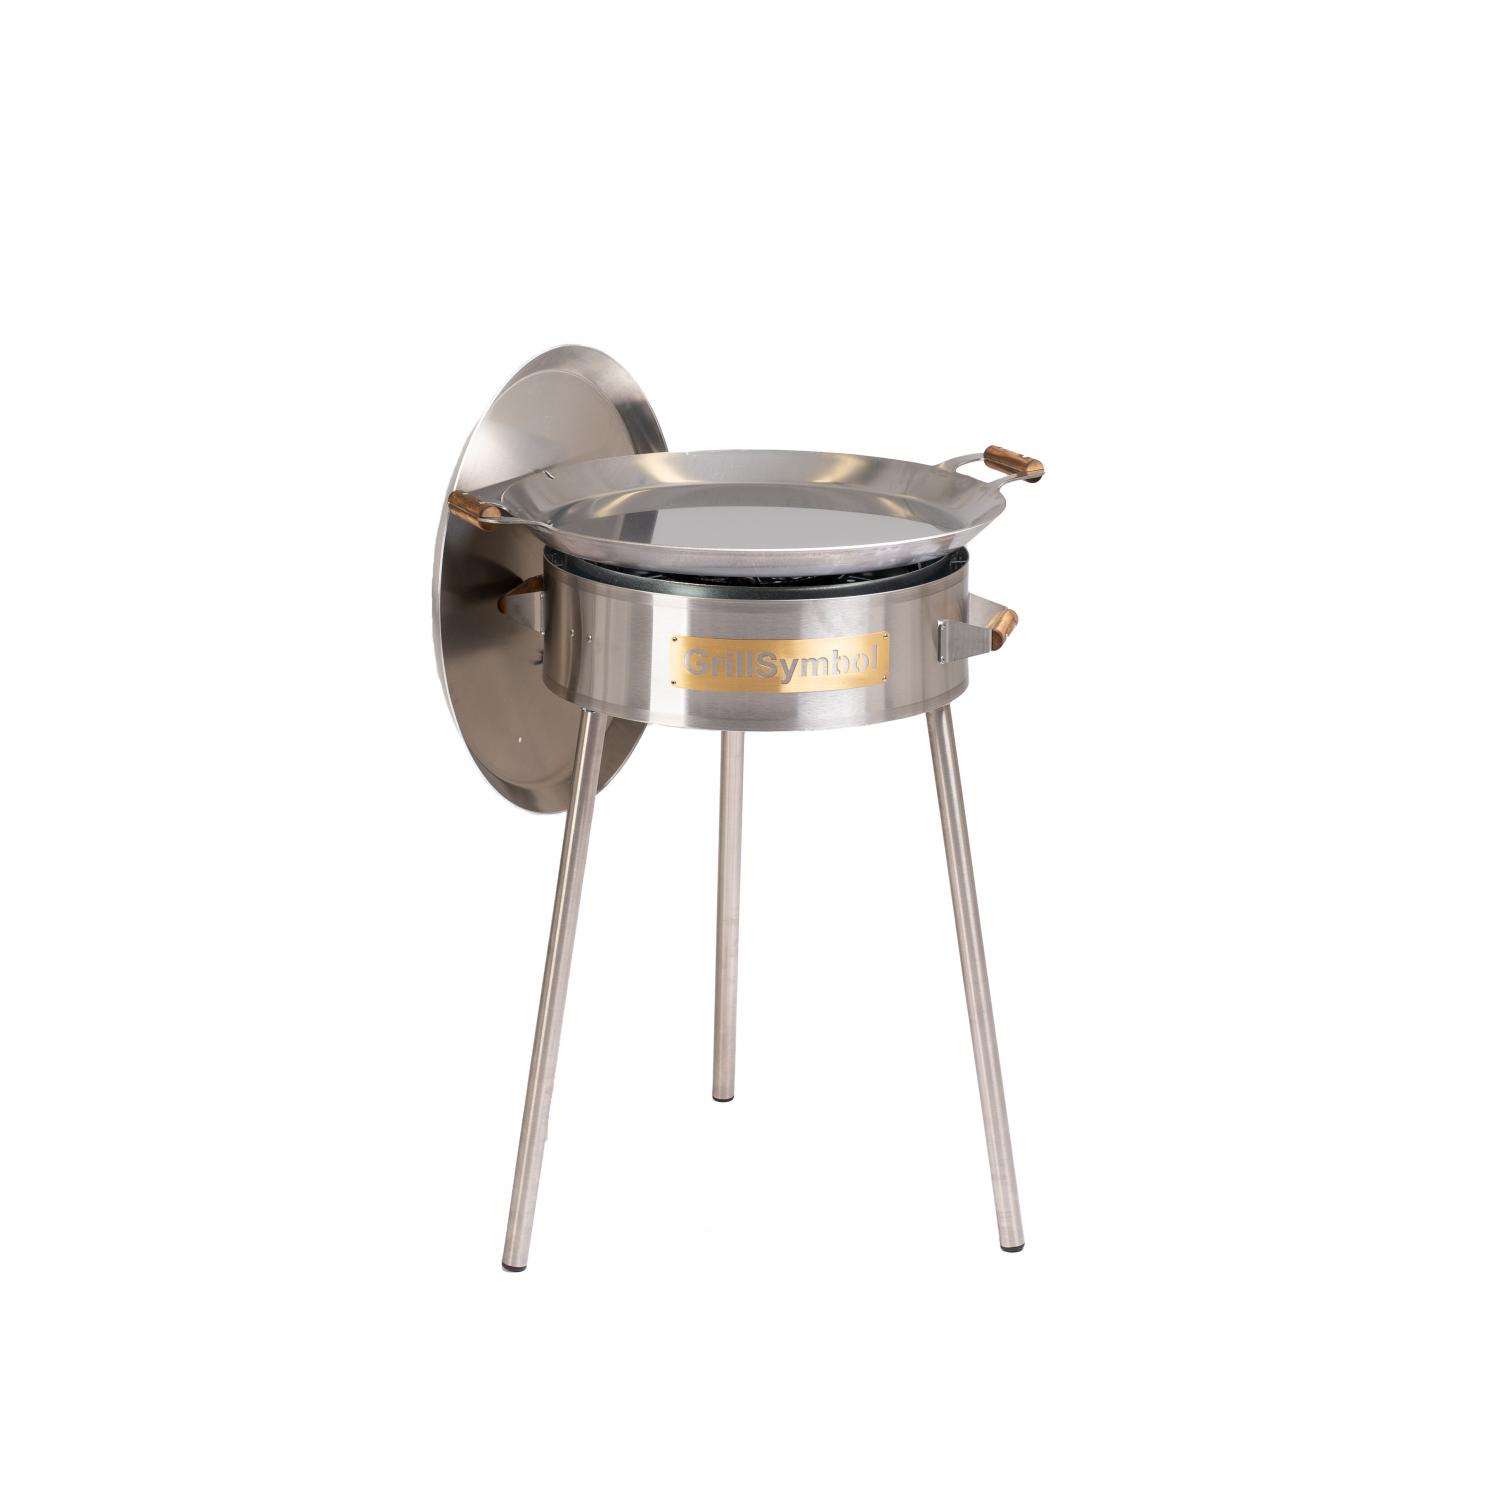 Frying pan. Pro 580. Stainless steel.